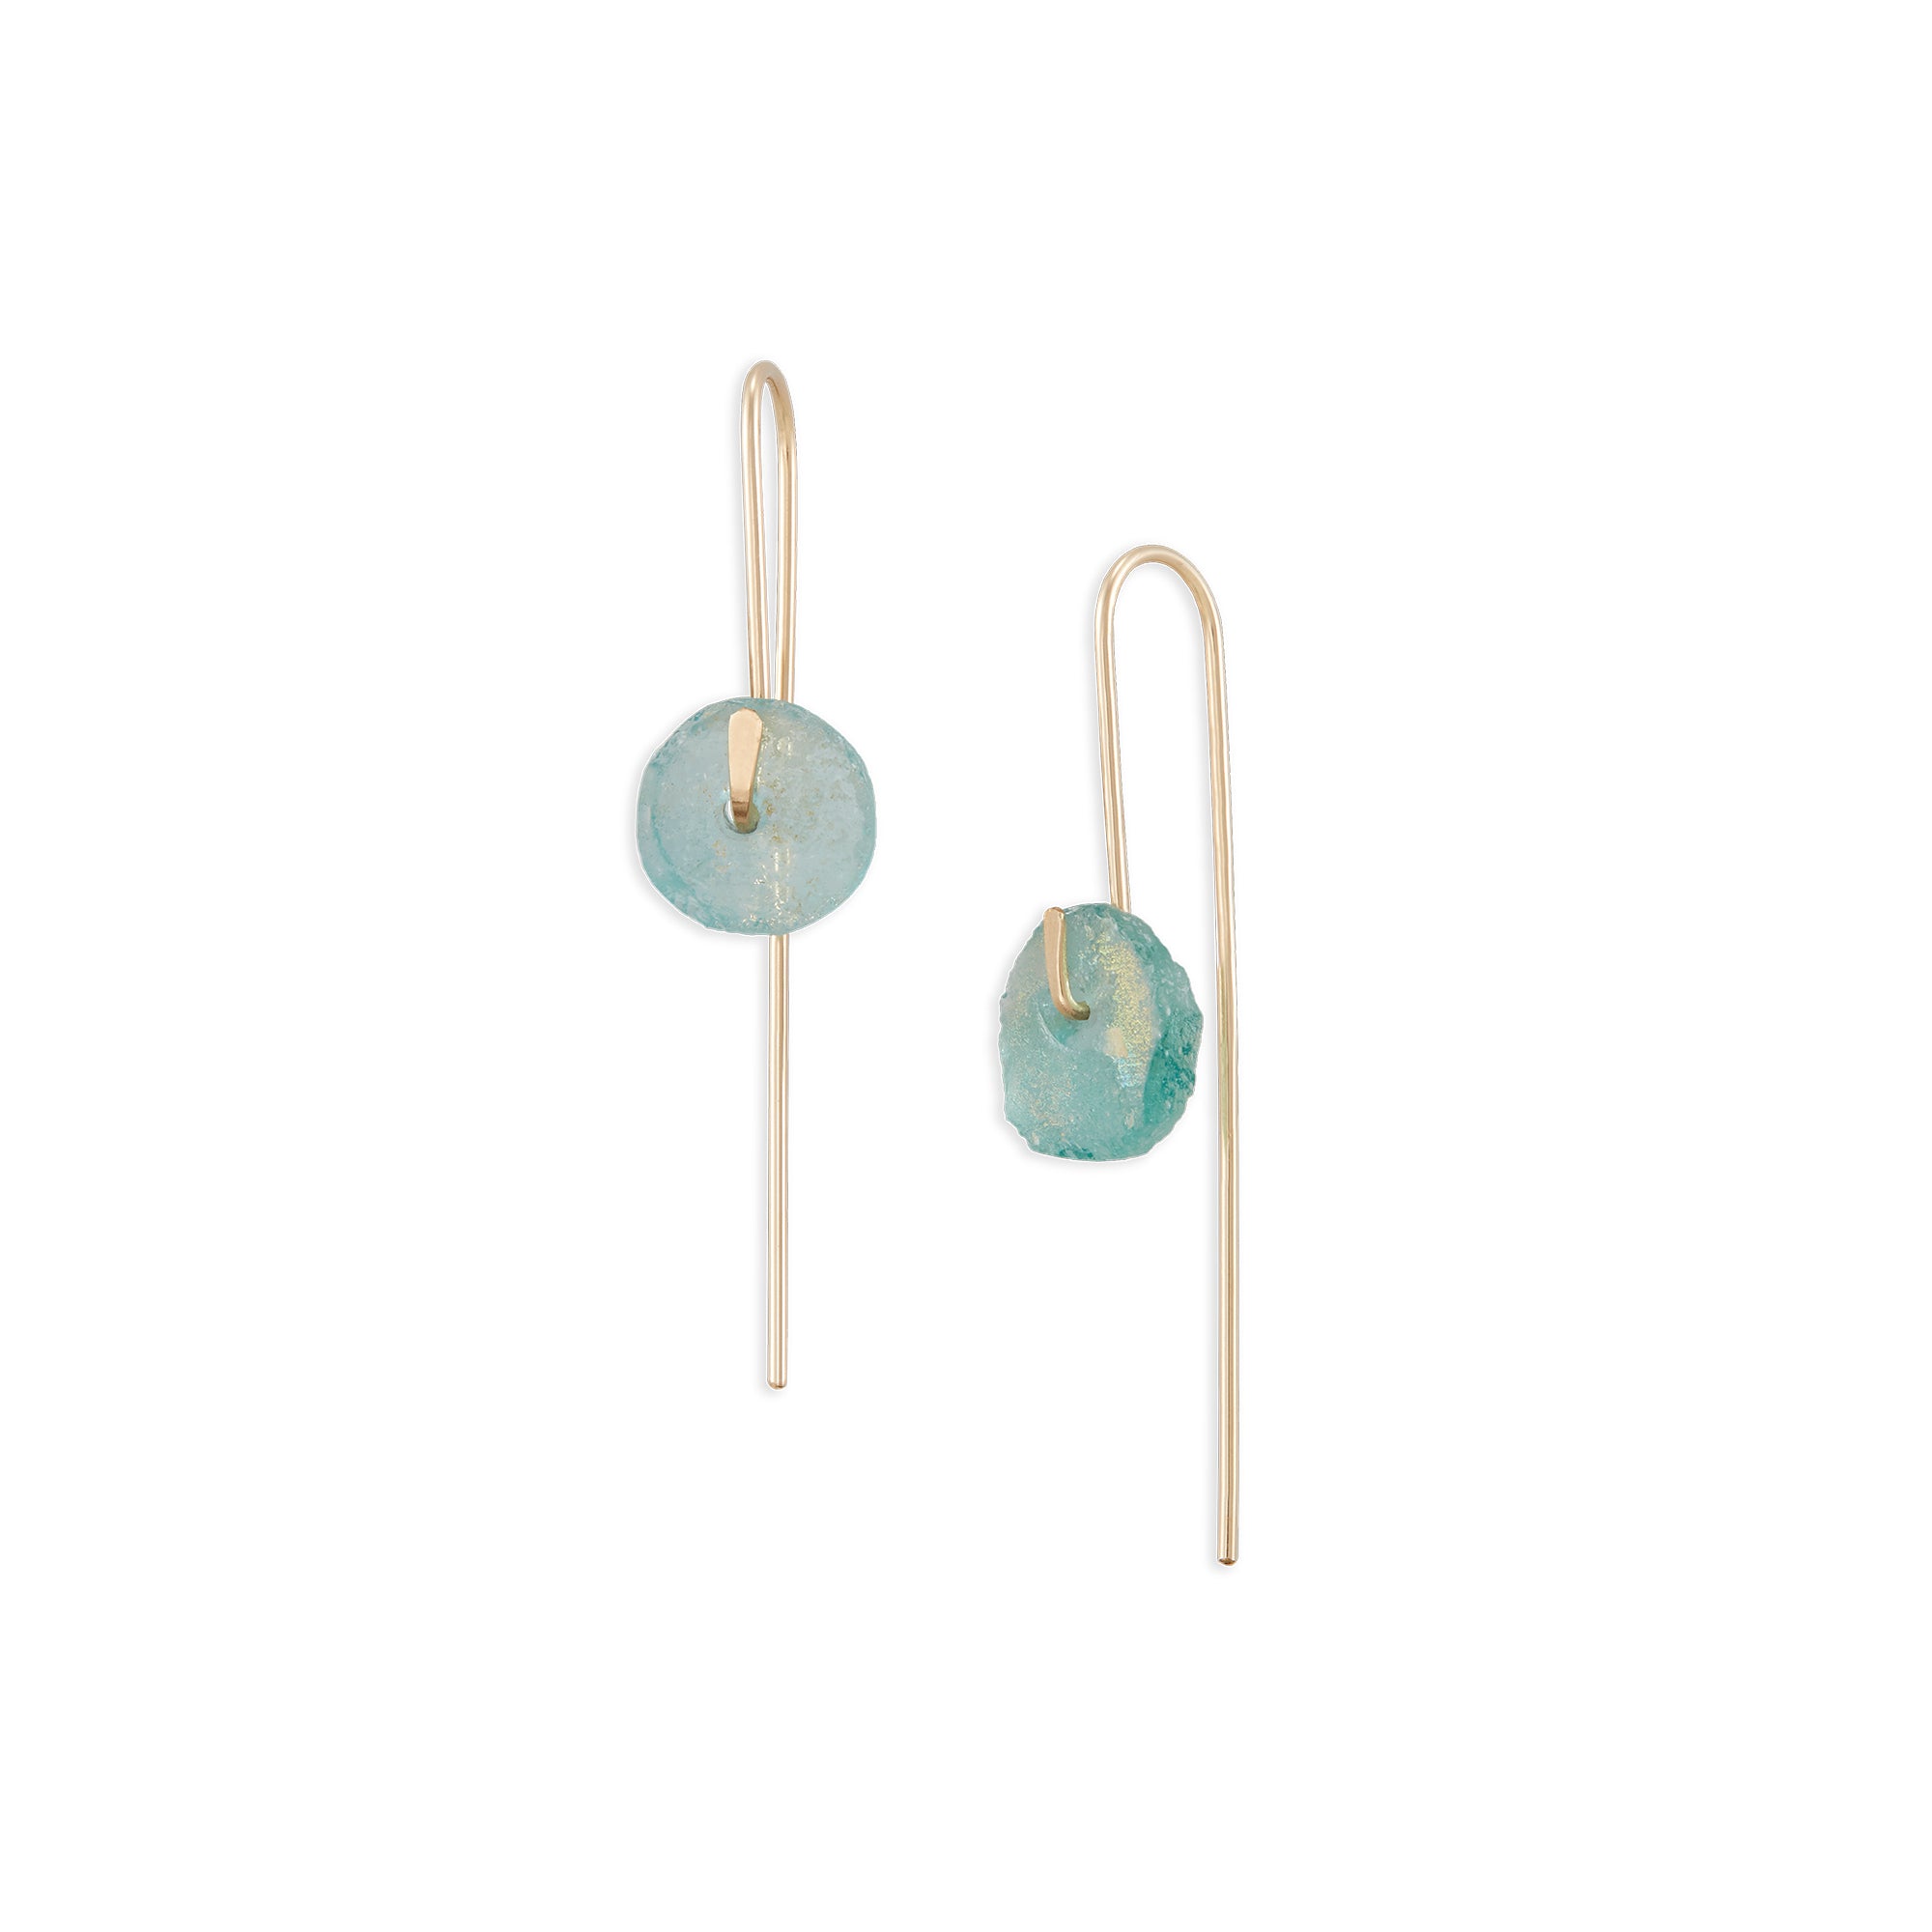 The Medium Bactrian Hook are simple threader style earrings featuring a one of a kind pair of Bactrian Glass beads. 